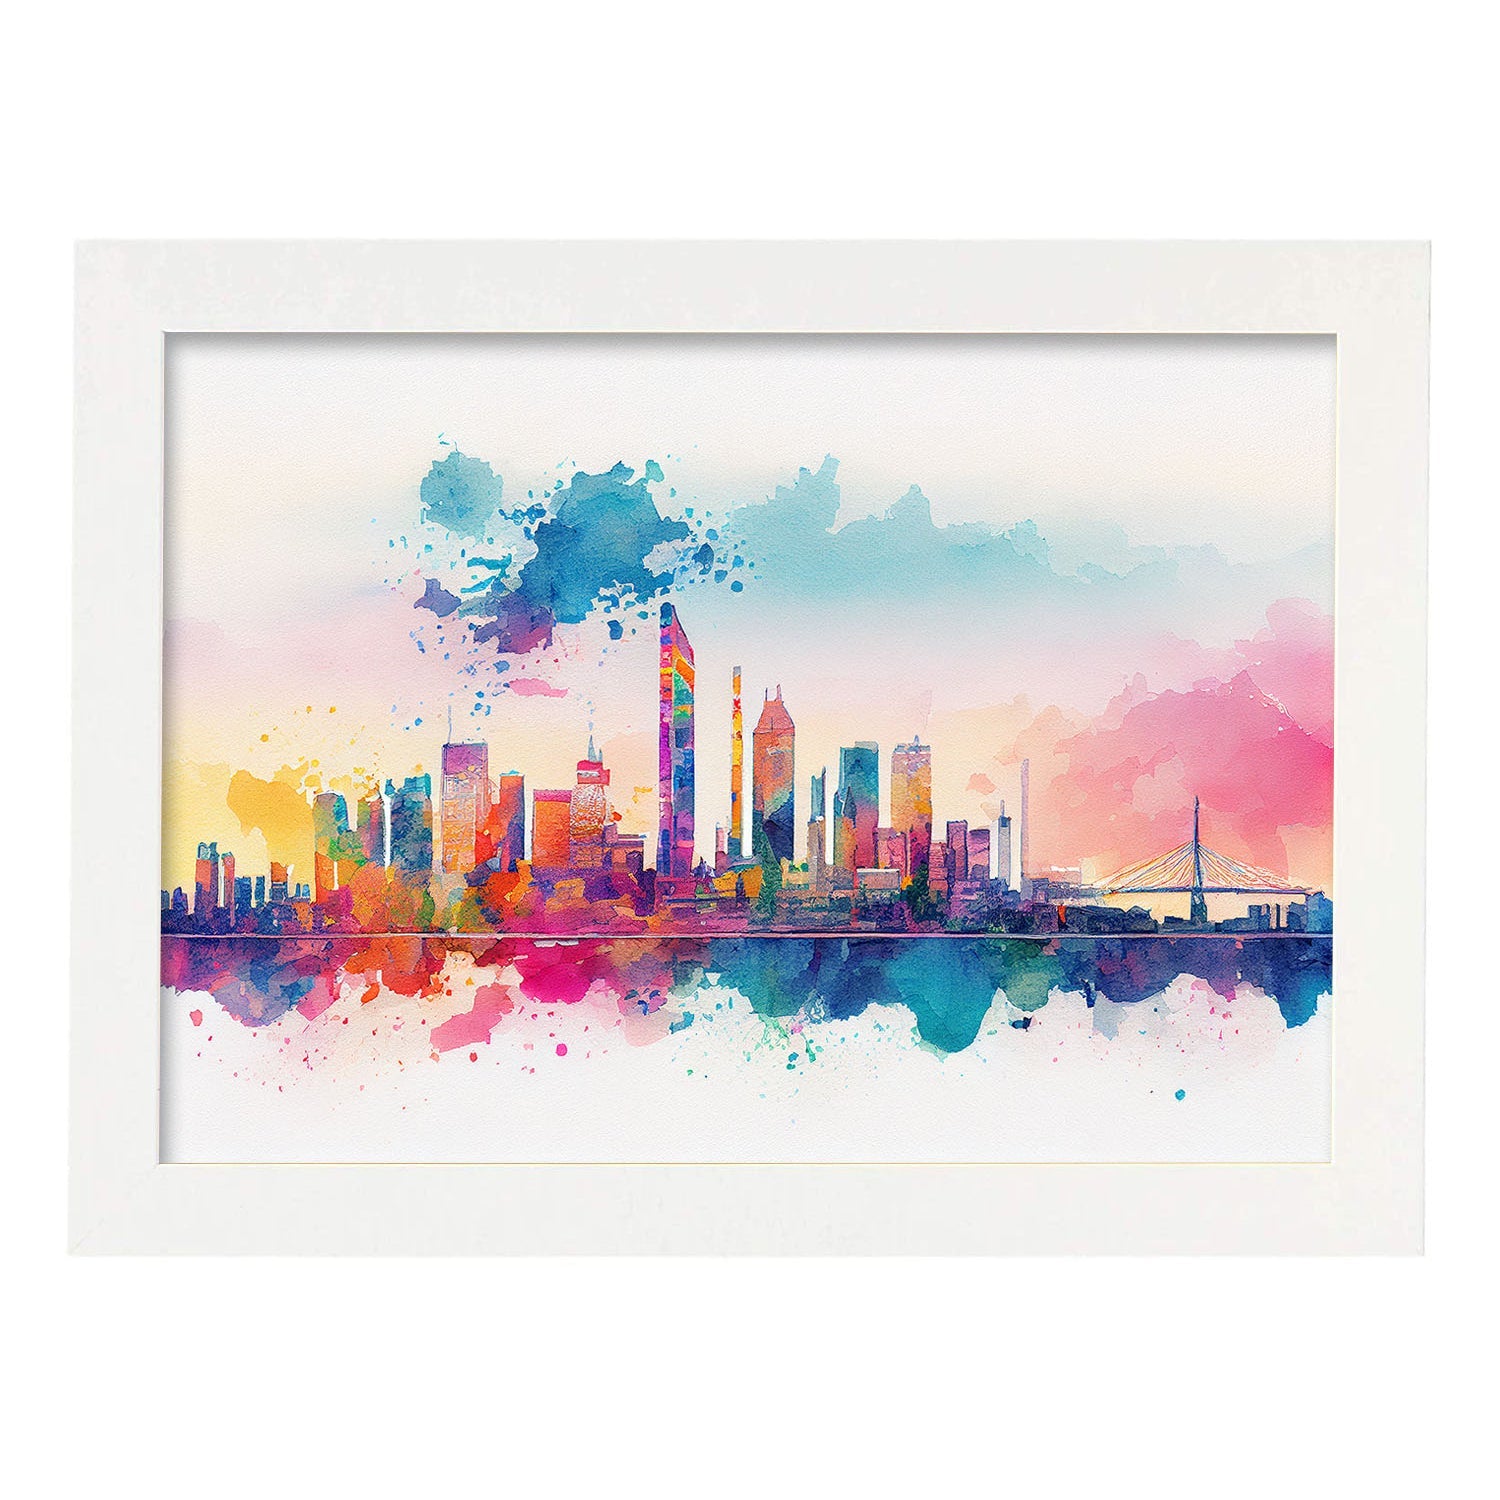 Nacnic watercolor of a skyline of the city of Osaka. Aesthetic Wall Art Prints for Bedroom or Living Room Design.-Artwork-Nacnic-A4-Marco Blanco-Nacnic Estudio SL